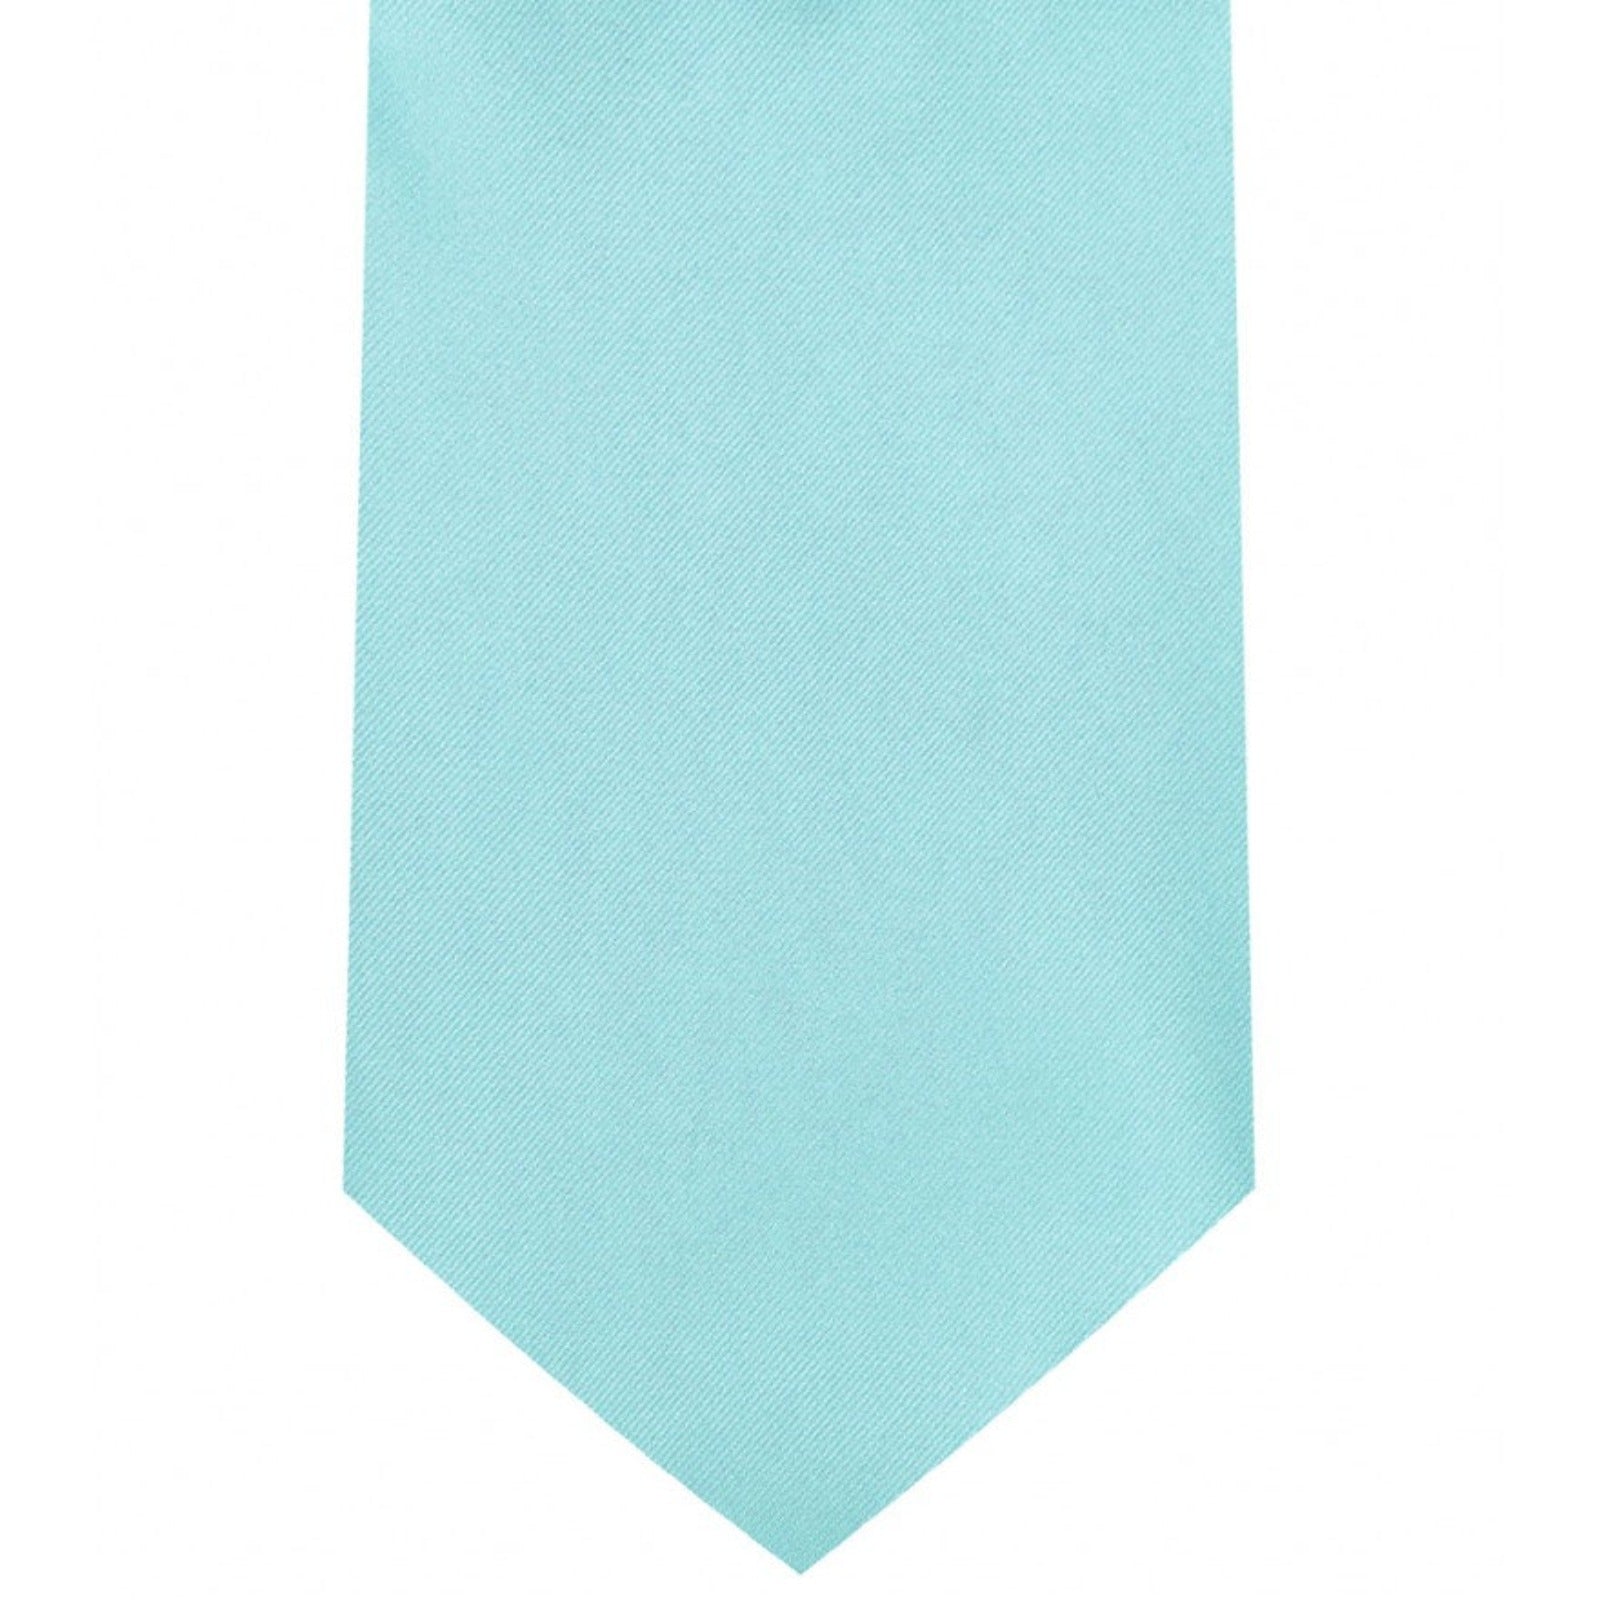 Classic Tiffany Blue Tie Regular width 3.5 inches With Matching Pocket Square | KCT Menswear 